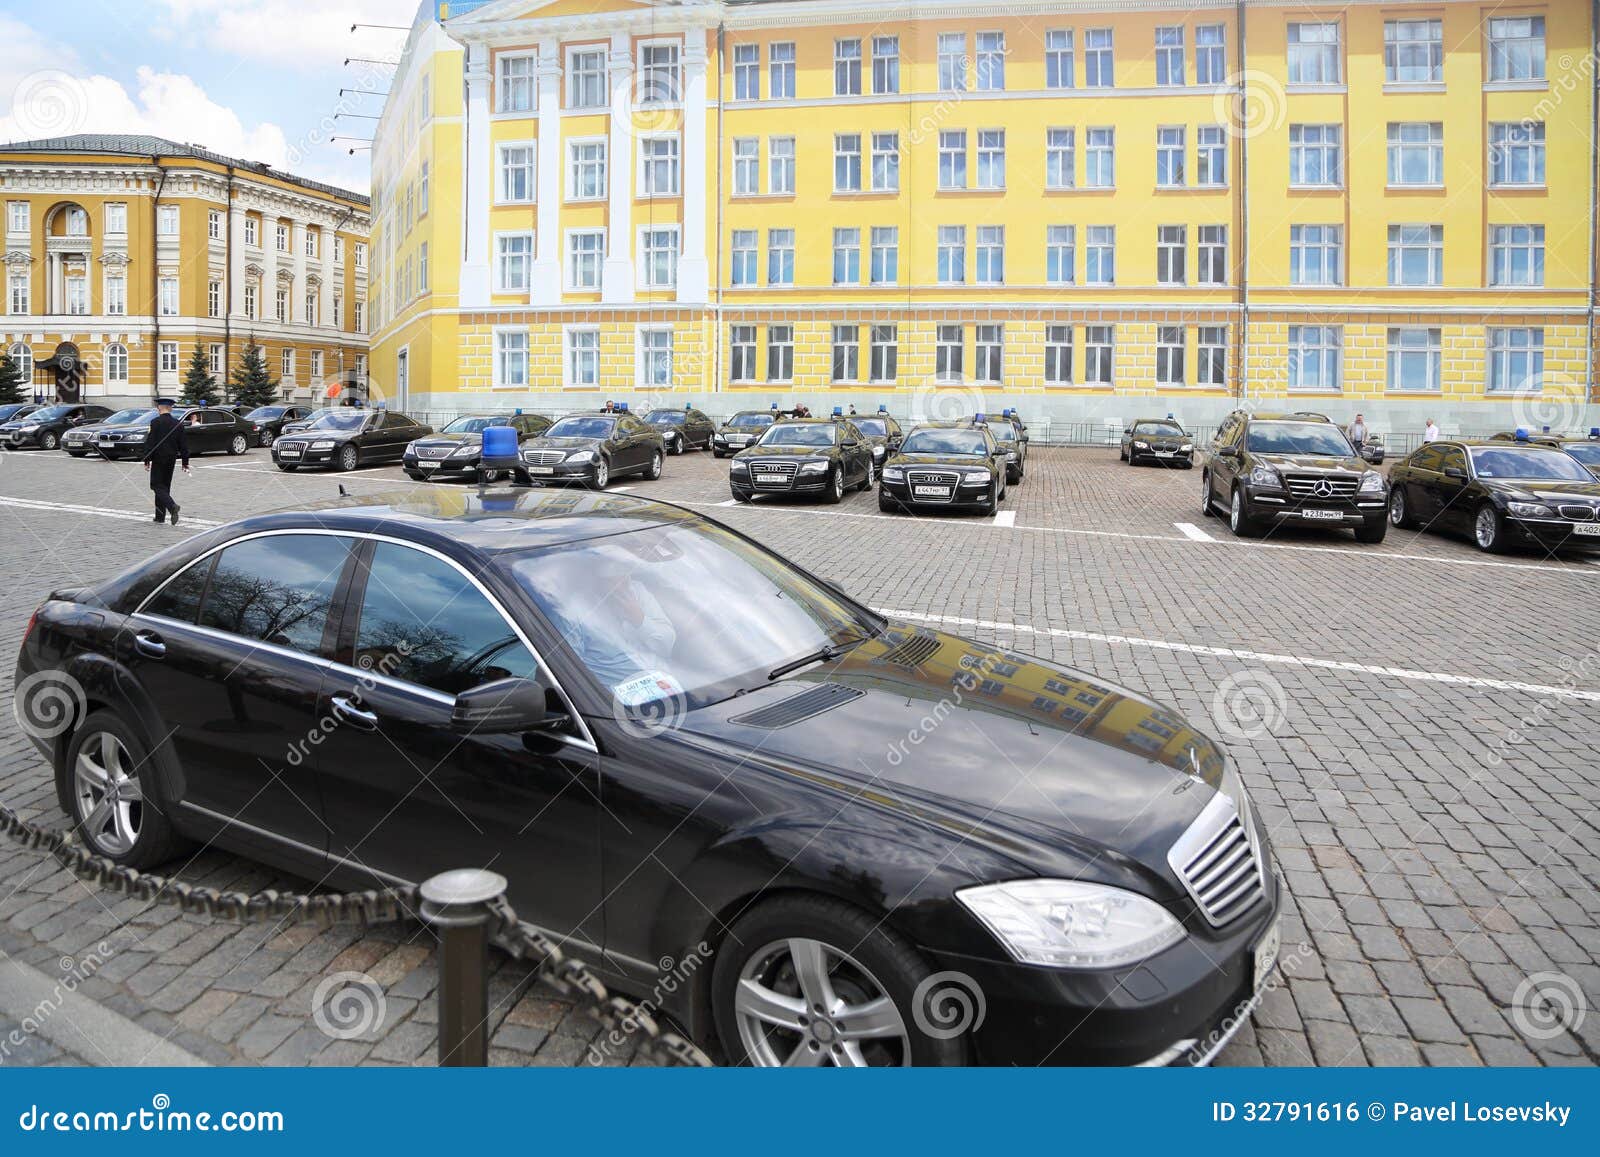 government-cars-stand-kremlin-moscow-april-april-moscow-russia-armored-limousines-mercedes-benz-s-model-vladimir-32791616.jpg